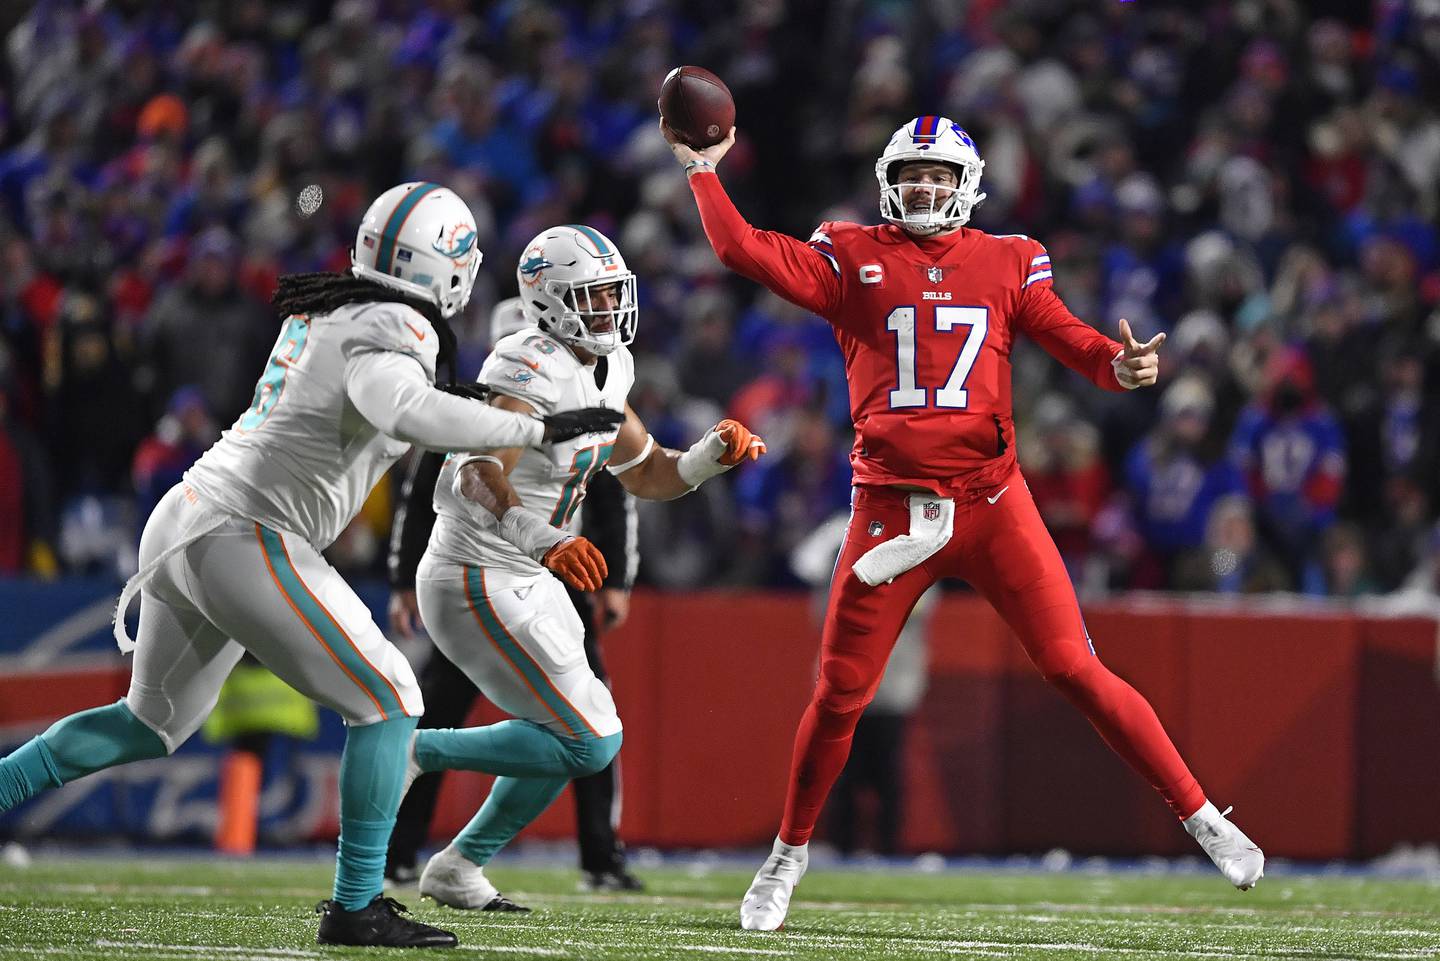 Bills quarterback Josh Allen gets off a pass during the second half against the Dolphins on Dec. 17, 2022.